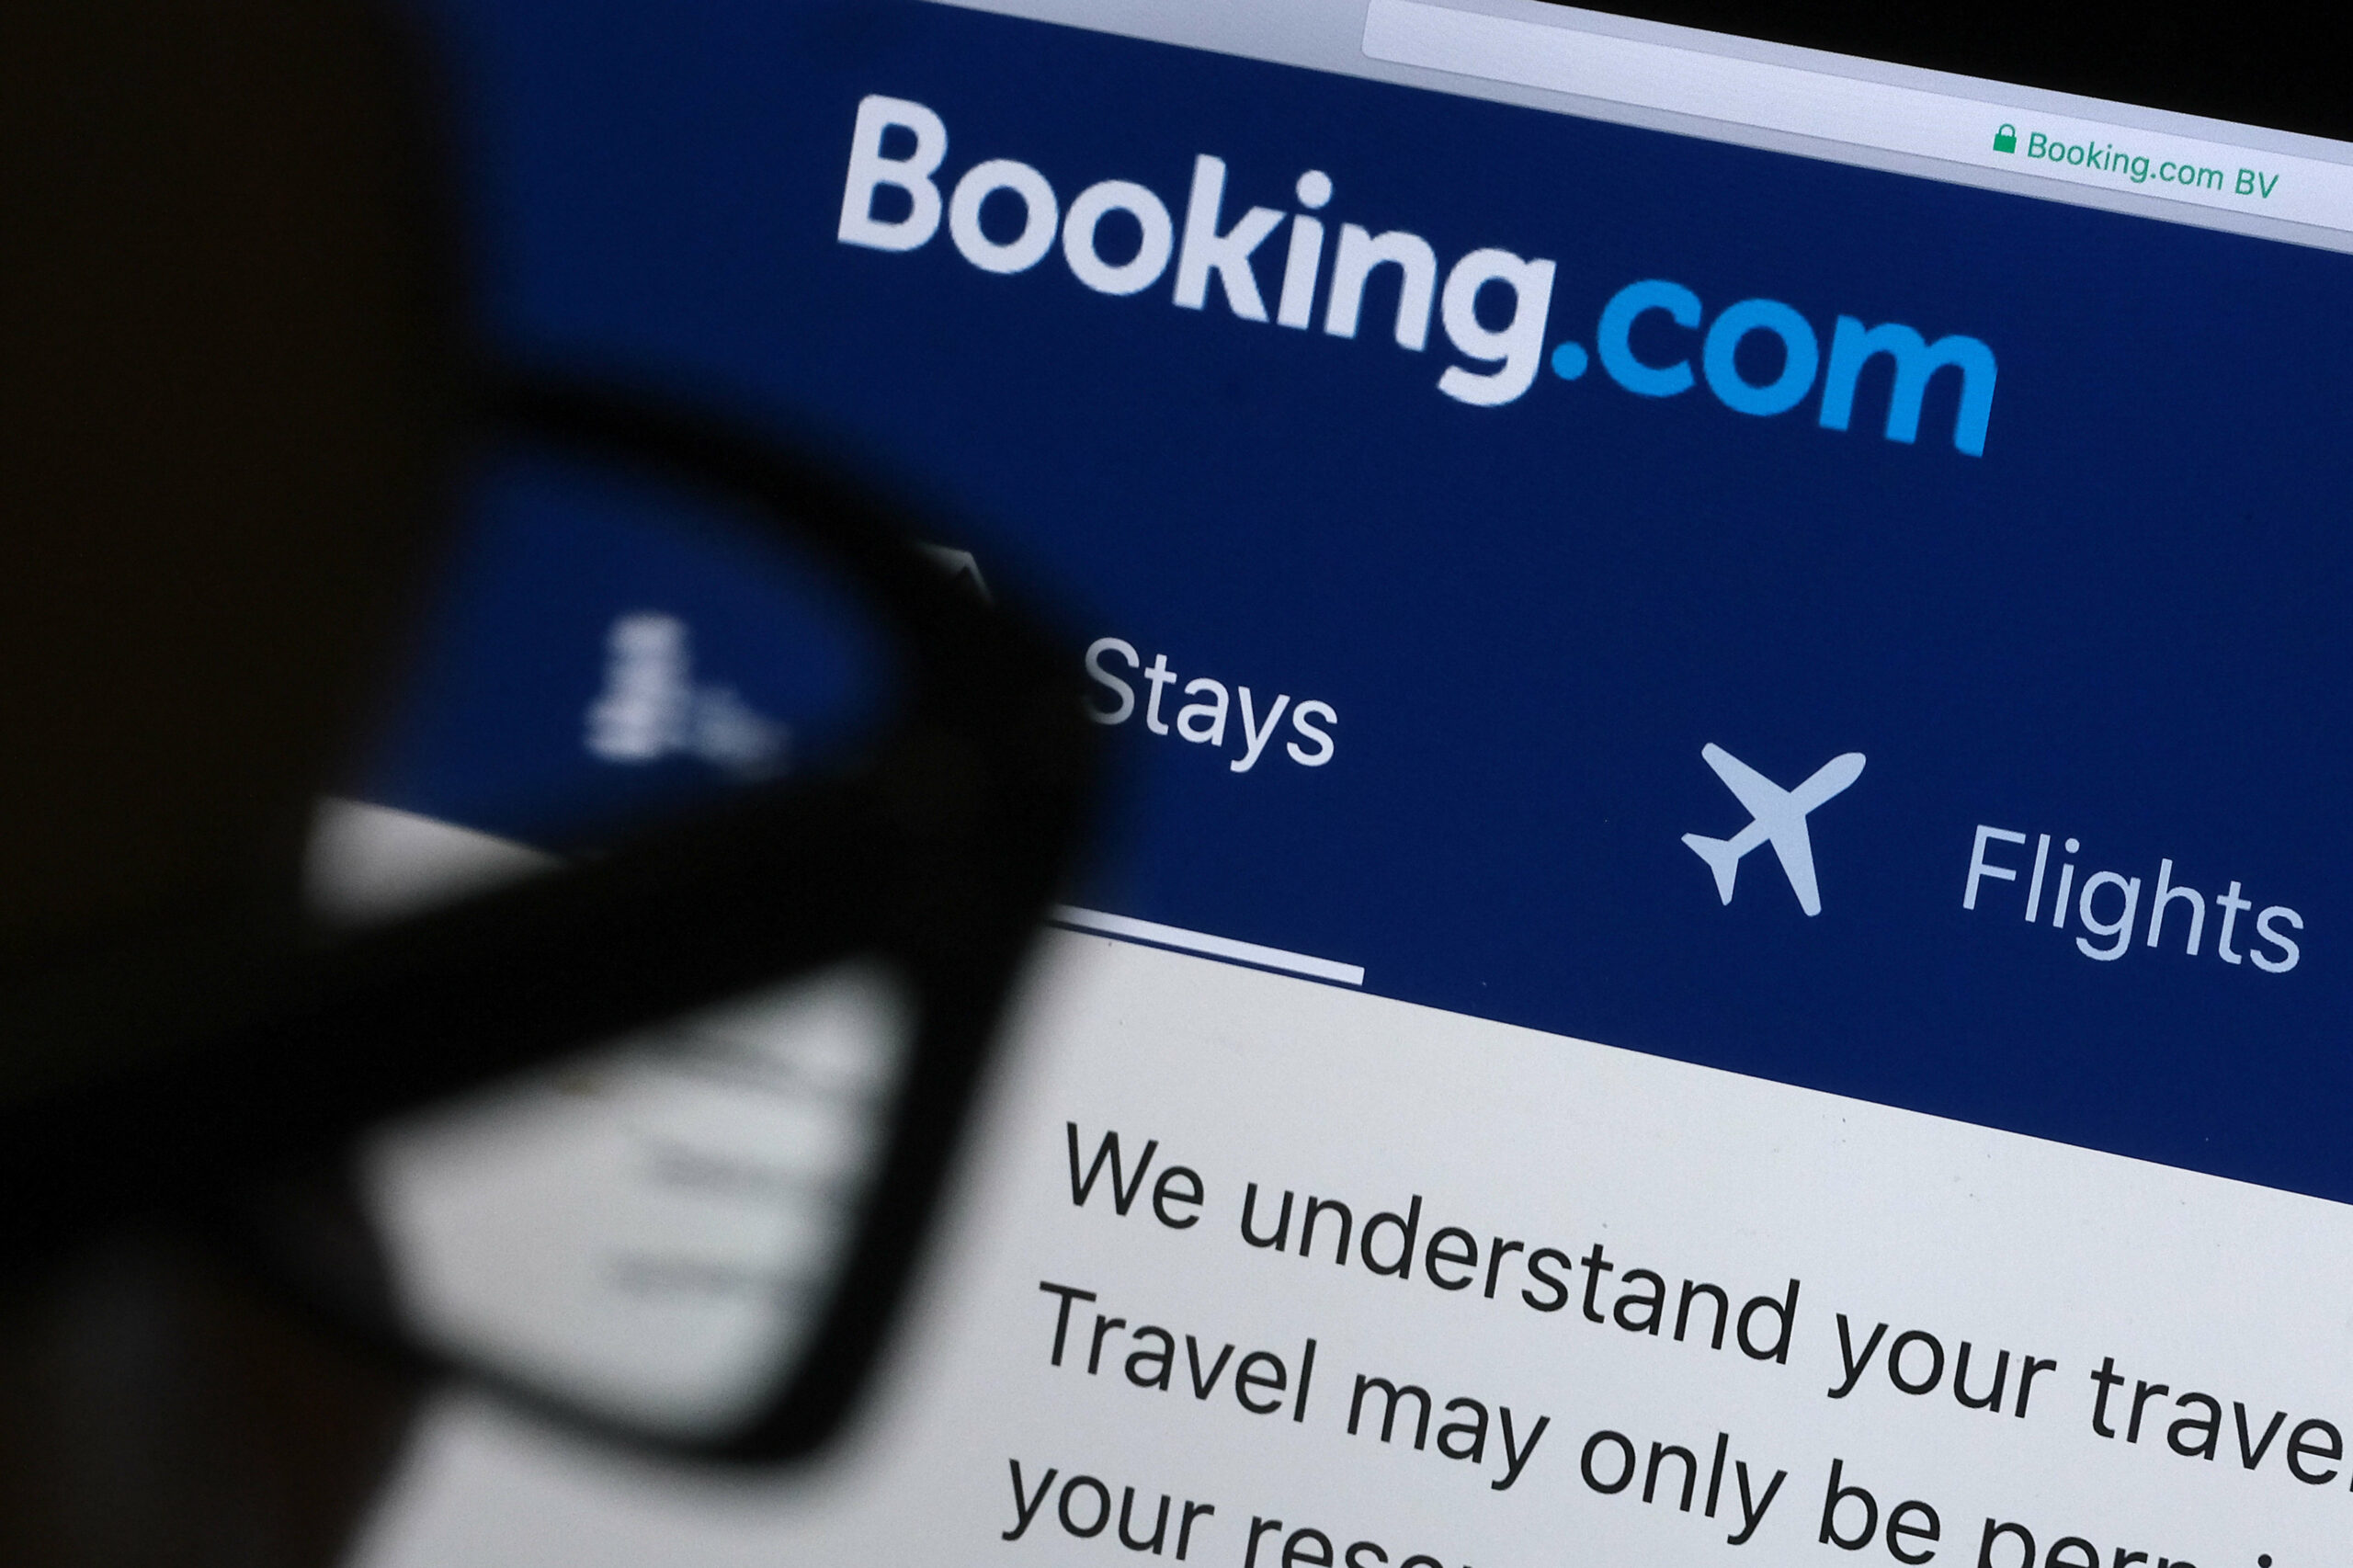 Booking.com is laying off up to 25% of its workforce due to coronavirus downturn